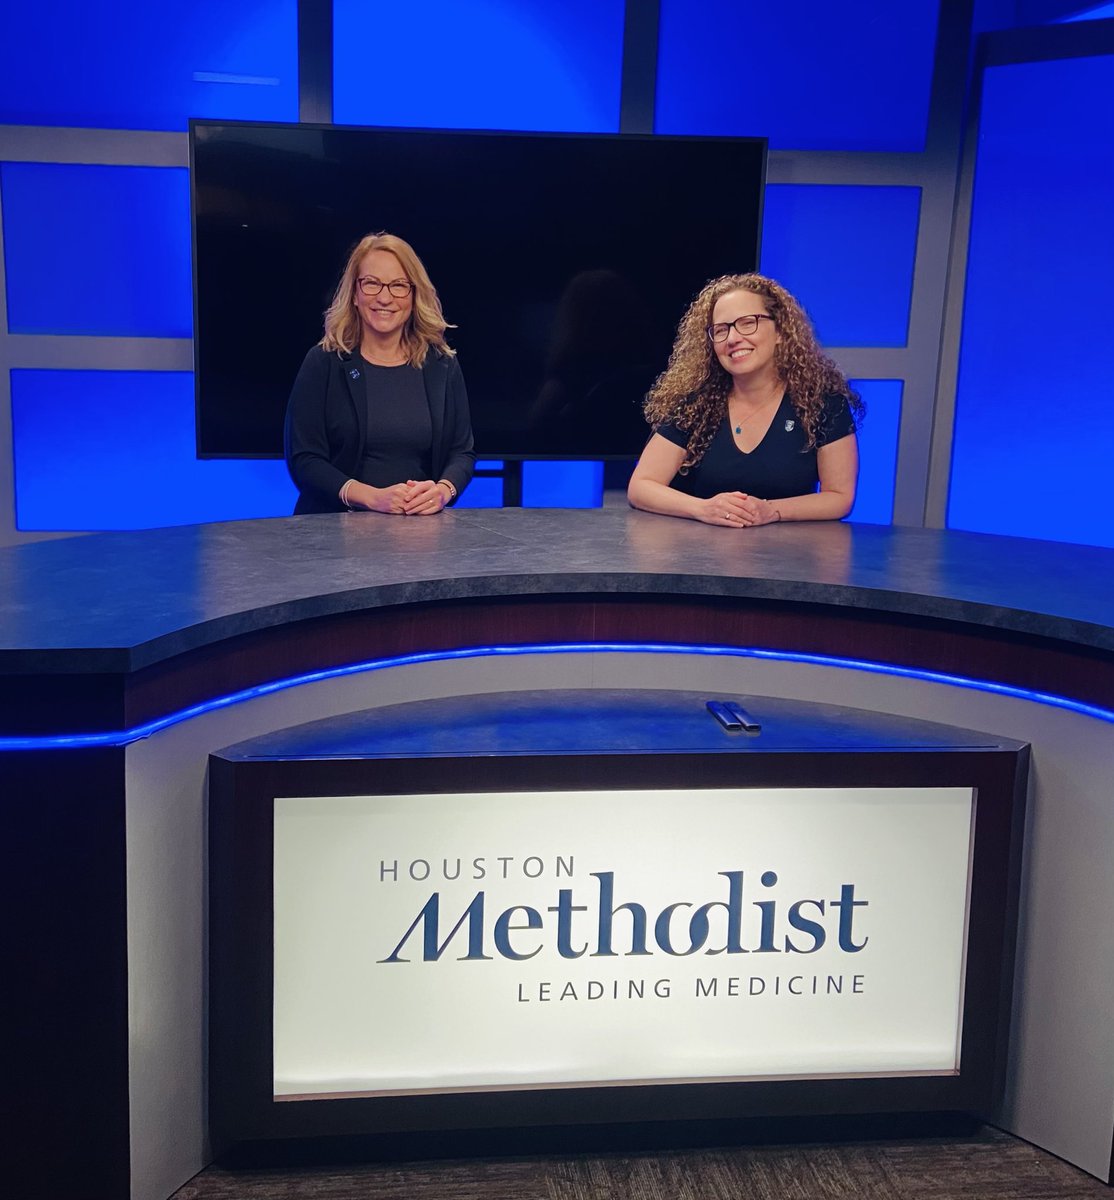 Great tour of ⁦⁦@MethodistHosp⁩ today & MITIE - the Houston Methodist Institute for Technology, Innovation & Education. We enjoyed our time in the filming studios! #Texas #Texasmedicalcenter